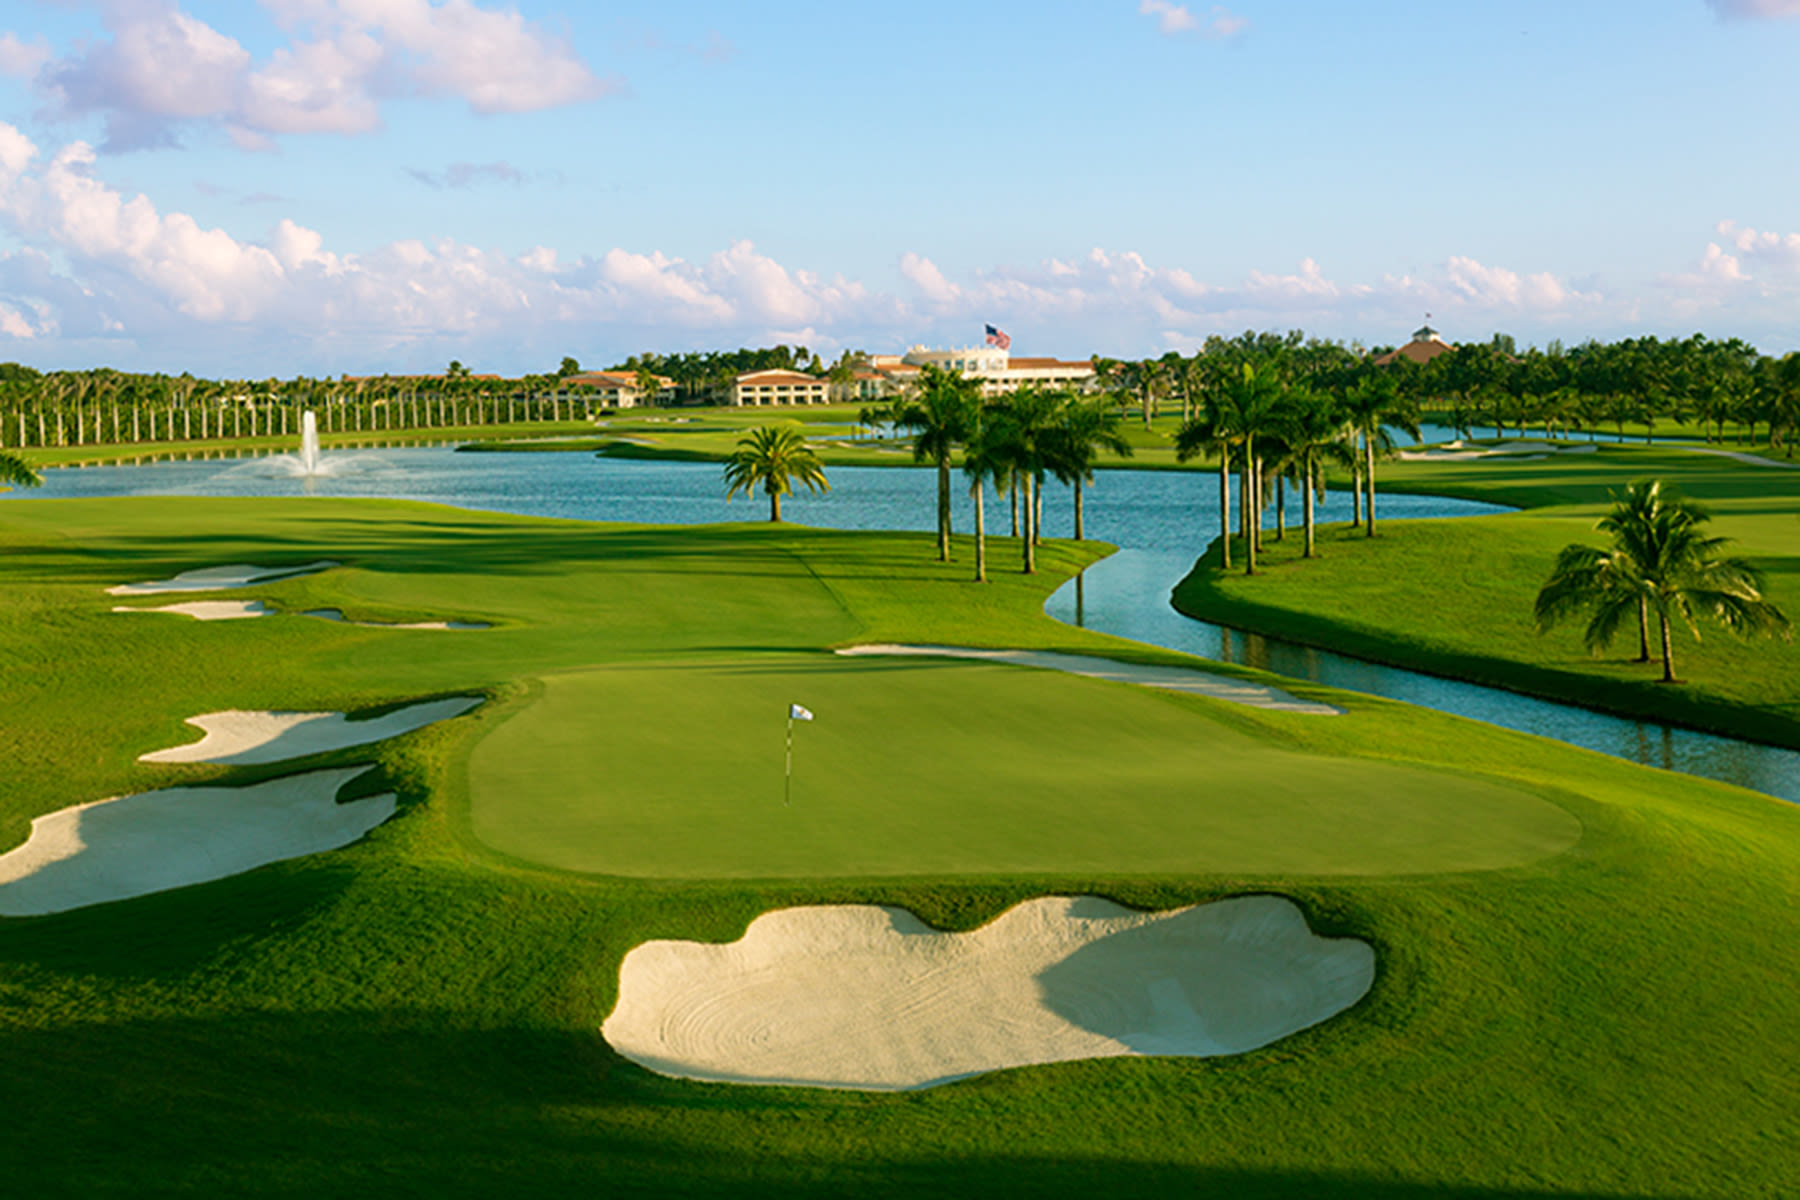 The best golf courses in South Florida